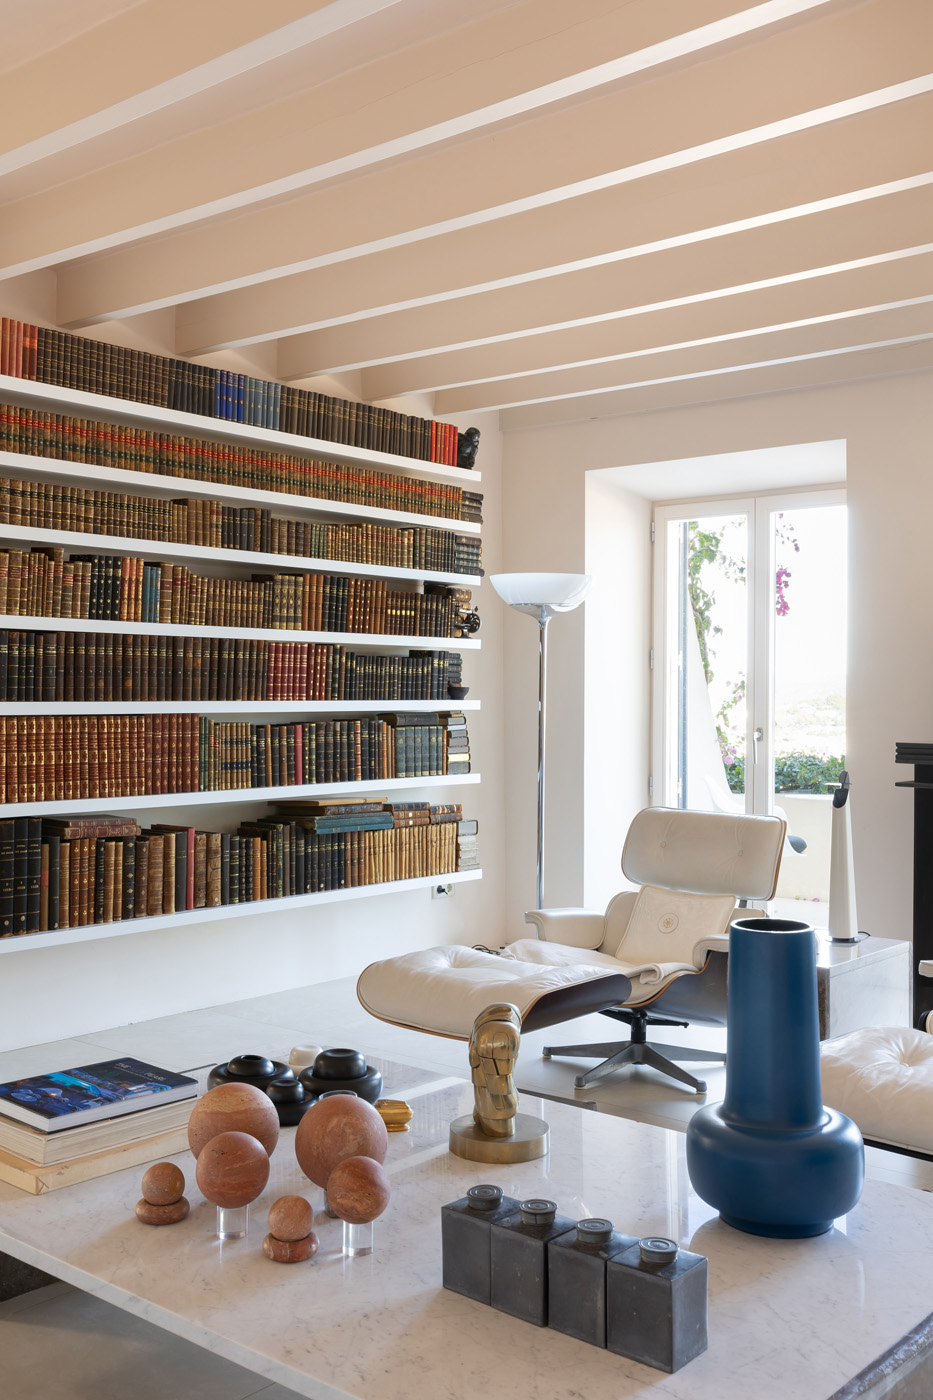 Iconic furniture and curious table sculptures backdropped by a wall of books in a luxury Ibizan townhouse